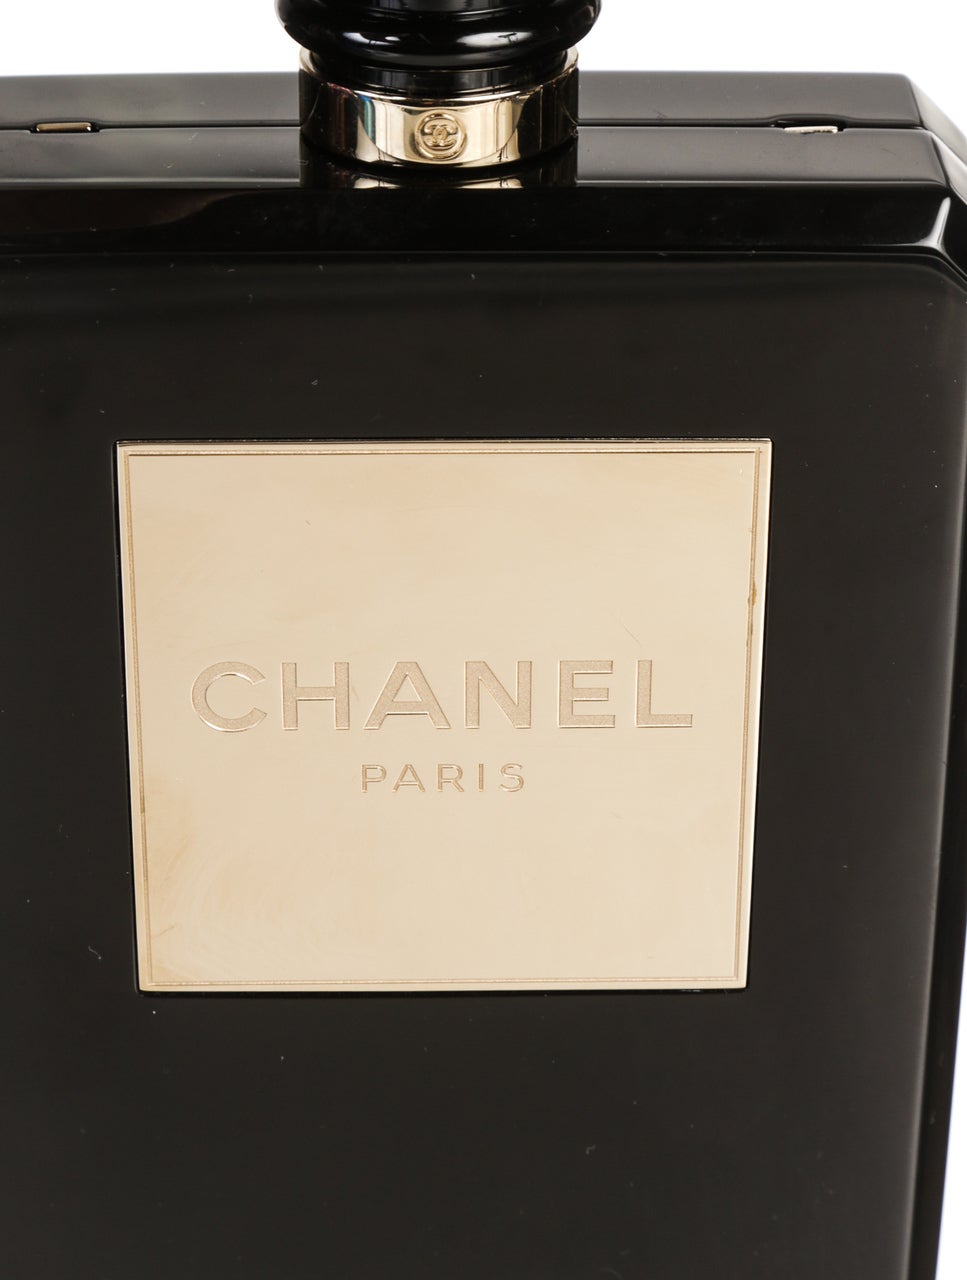 Don't let this little beauty slip past your fingers, buy it now and here while you still can. This phenomenal Chanel No.5 Perfume Bottle Clutch was designed after the simplistic and iconic Chanel No.5 perfume bottle. It has made its way into our